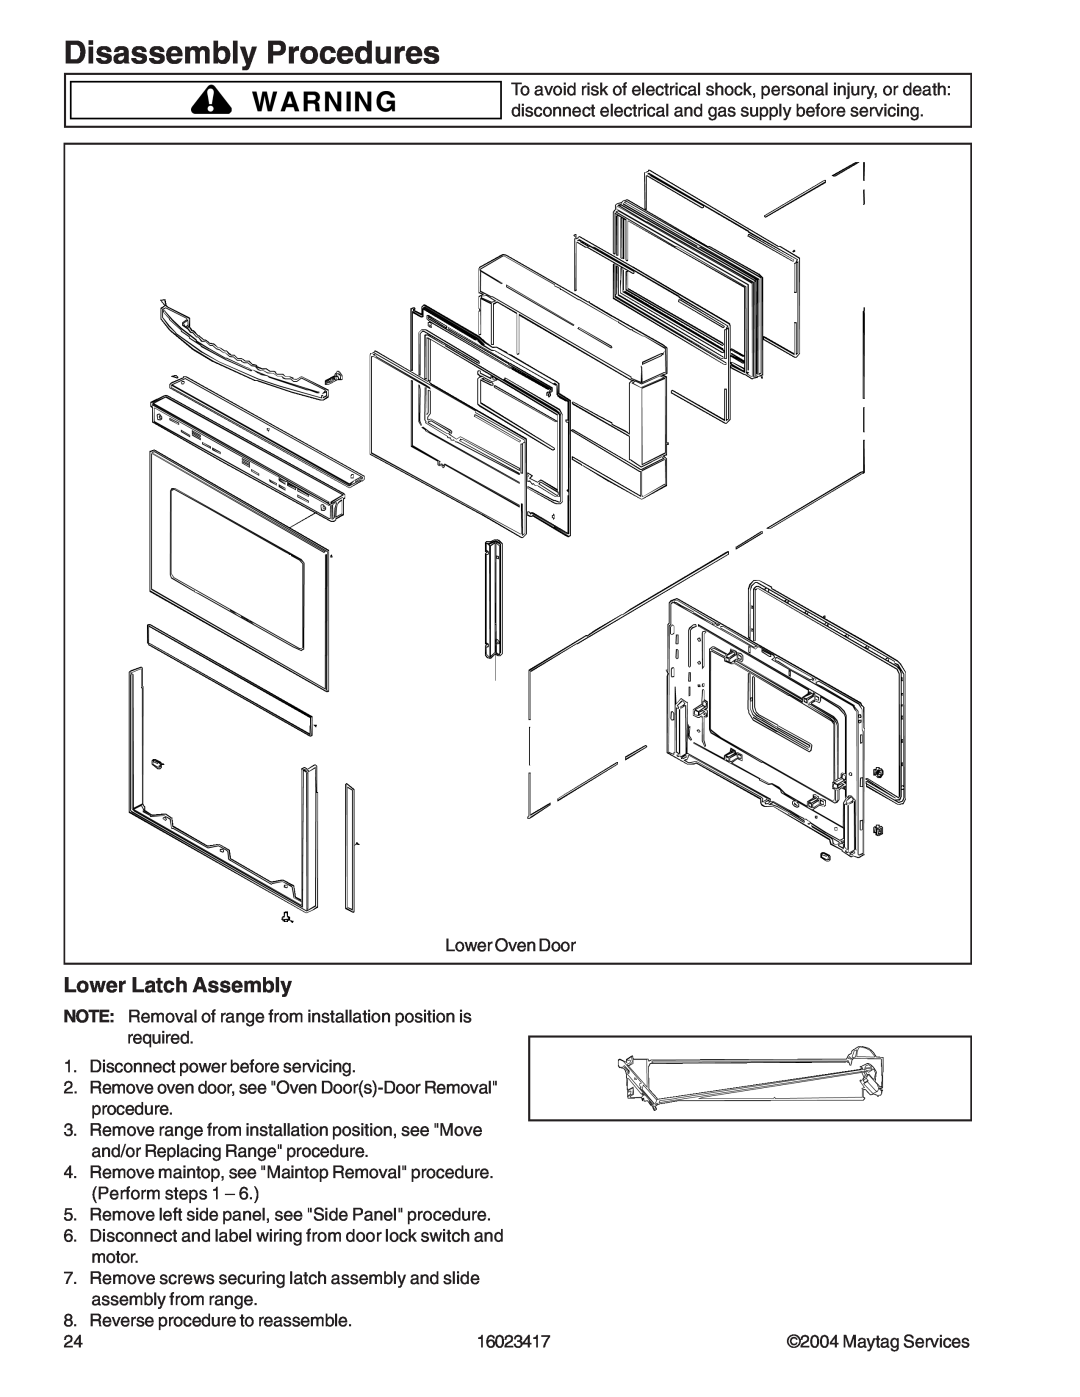 Jenn-Air JDR8895ACS/W, JDR8895AAB/S/W manual Lower Latch Assembly, Disassembly Procedures 